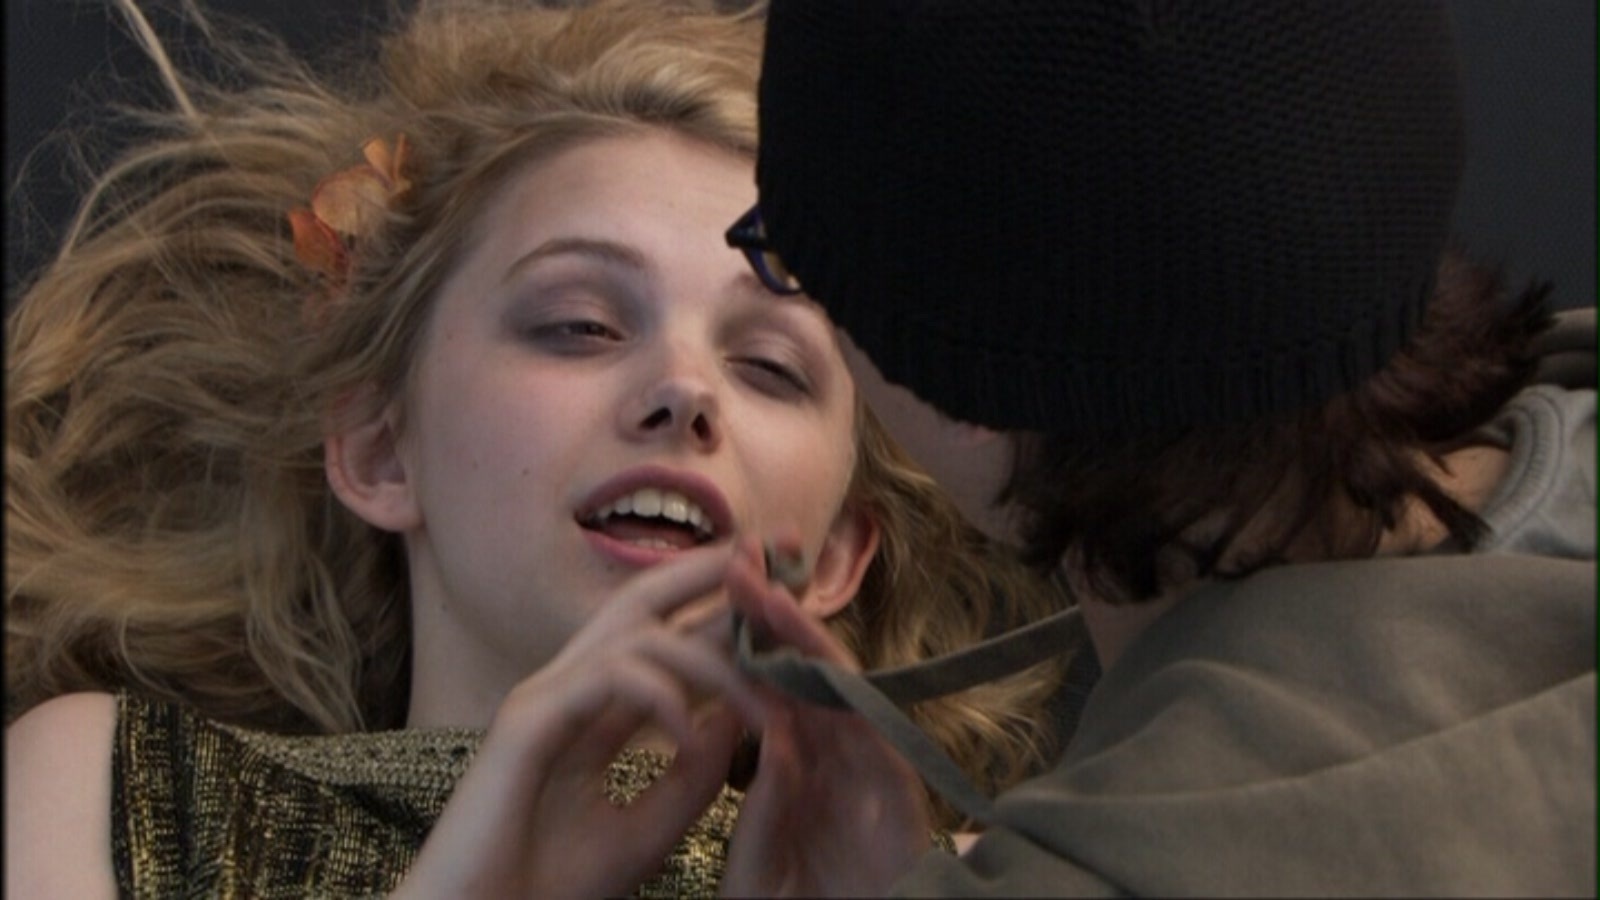 Sid and Cassie Images on Fanpop.